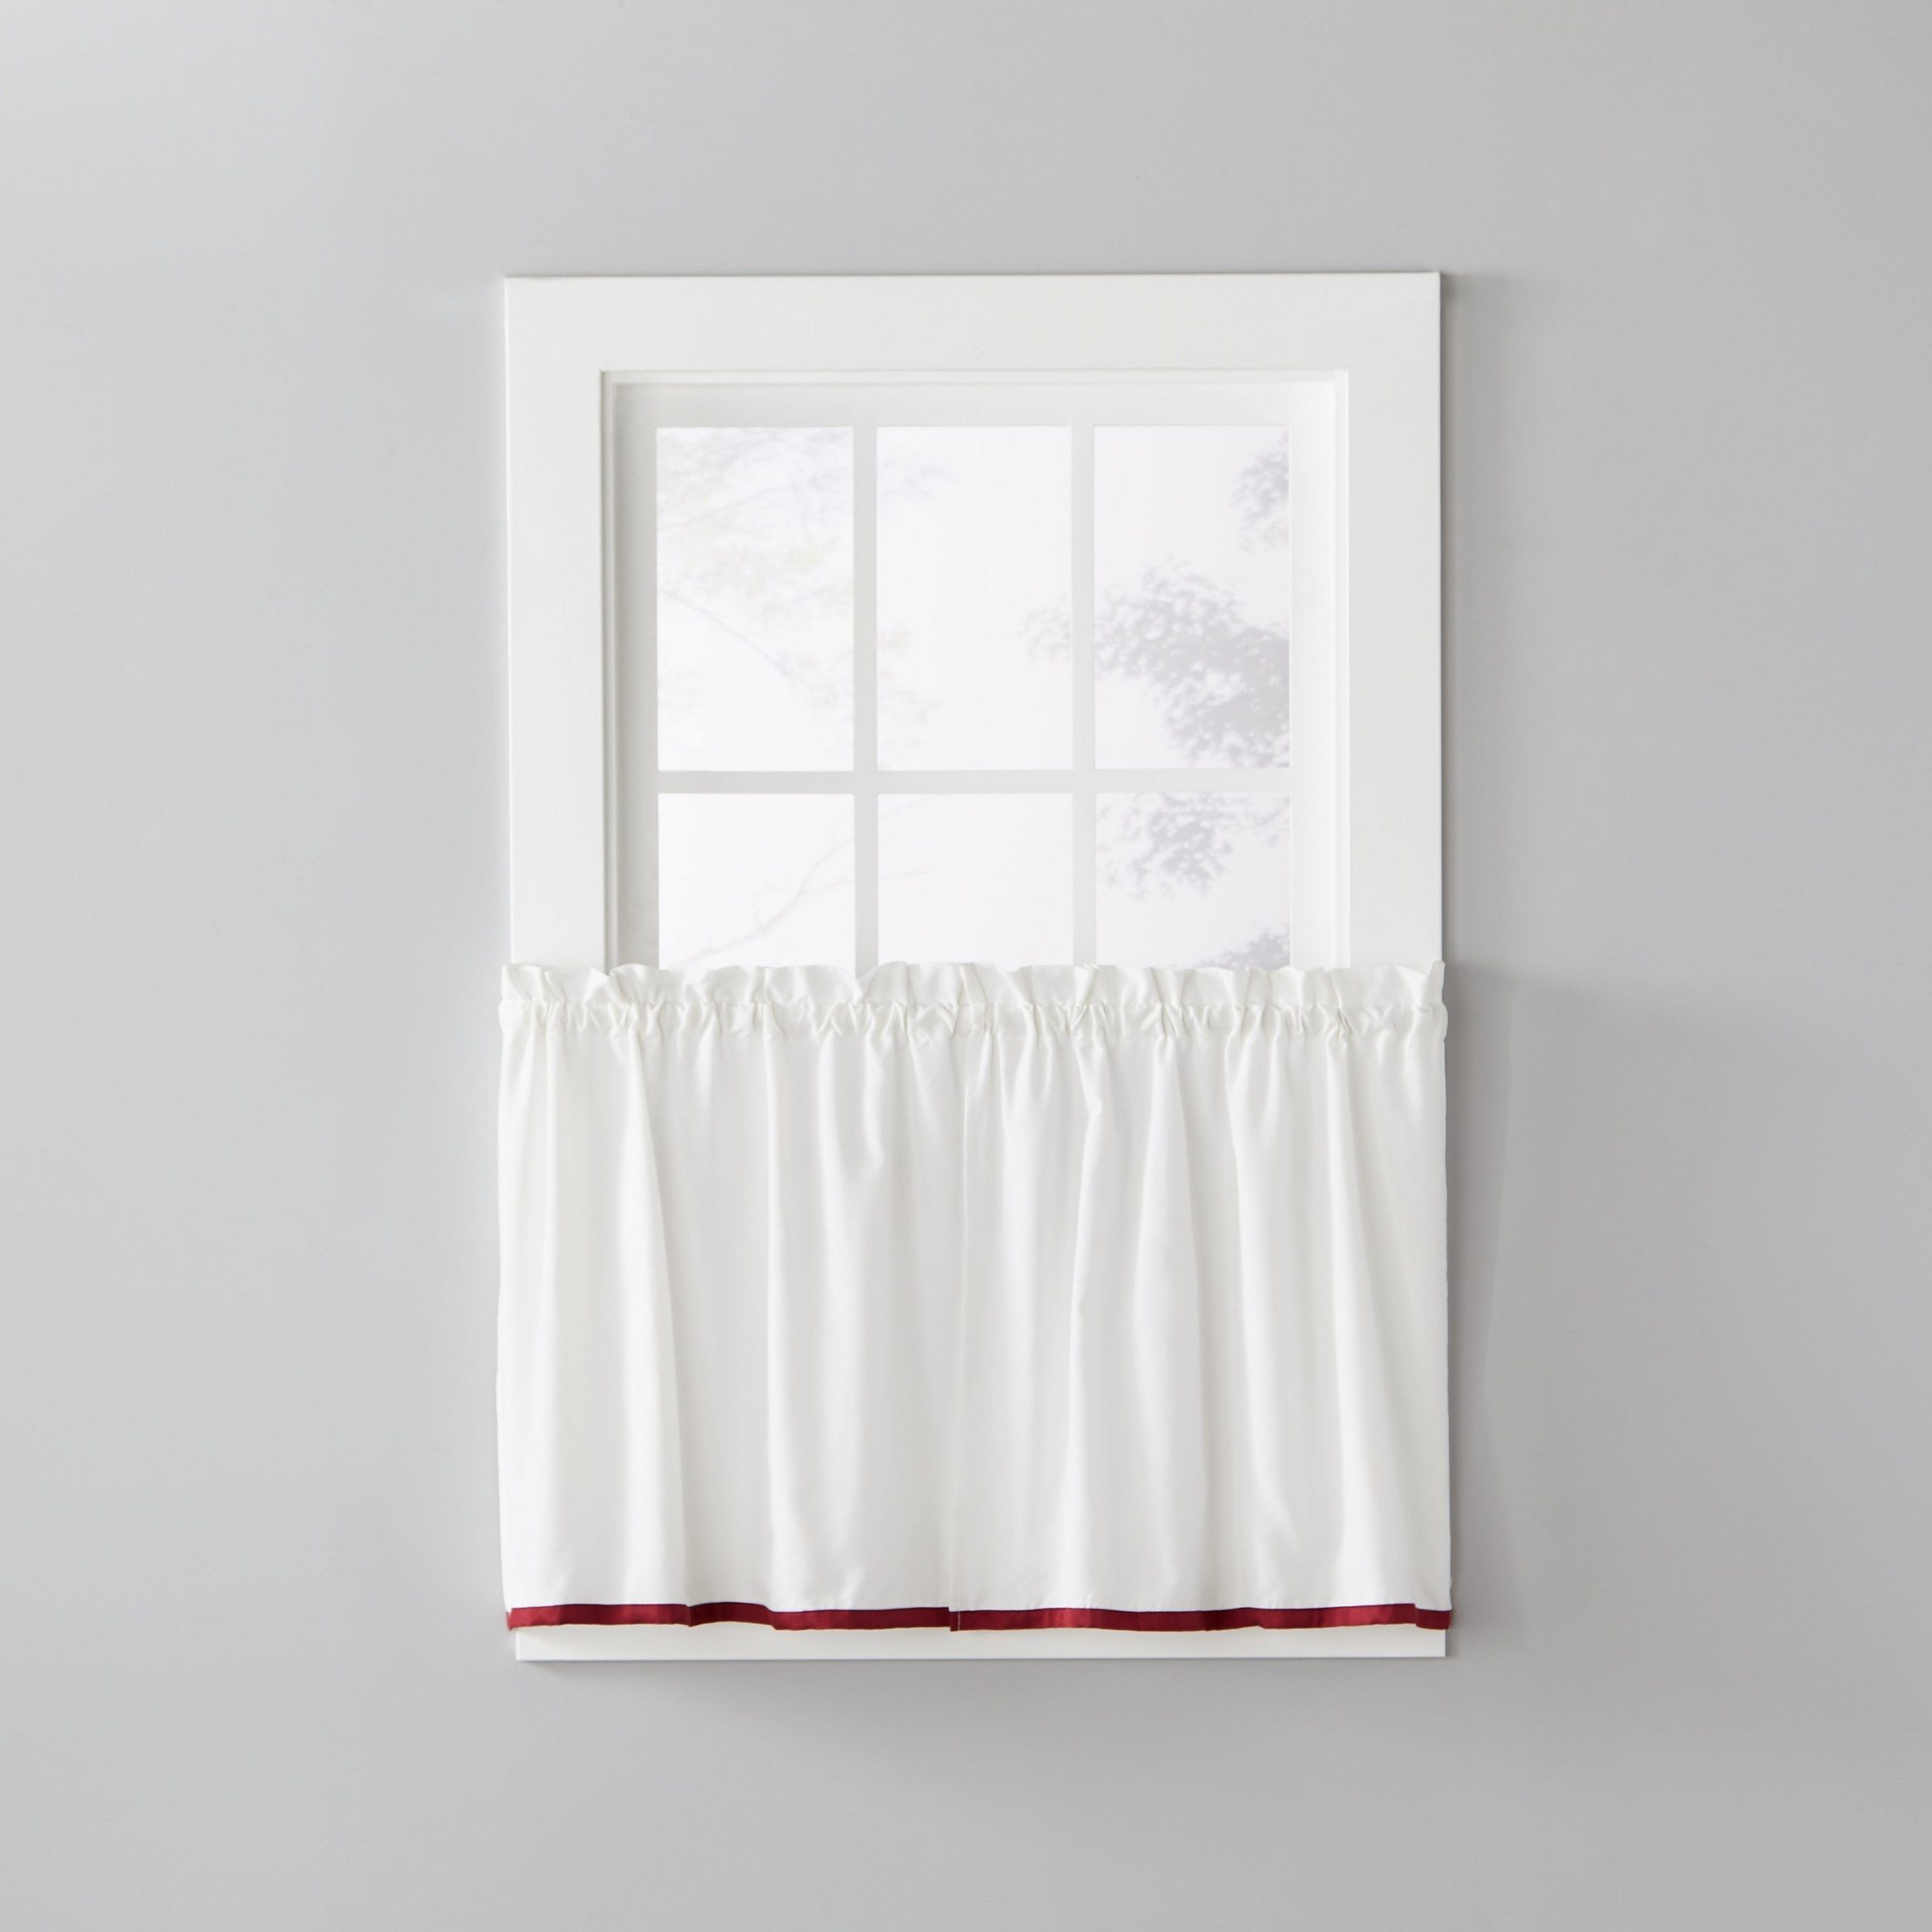 Buy Red Curtain Tiers Online At Overstock | Our Best Window In Flinders Forge 30 Inch Tiers In Garnet (View 9 of 20)